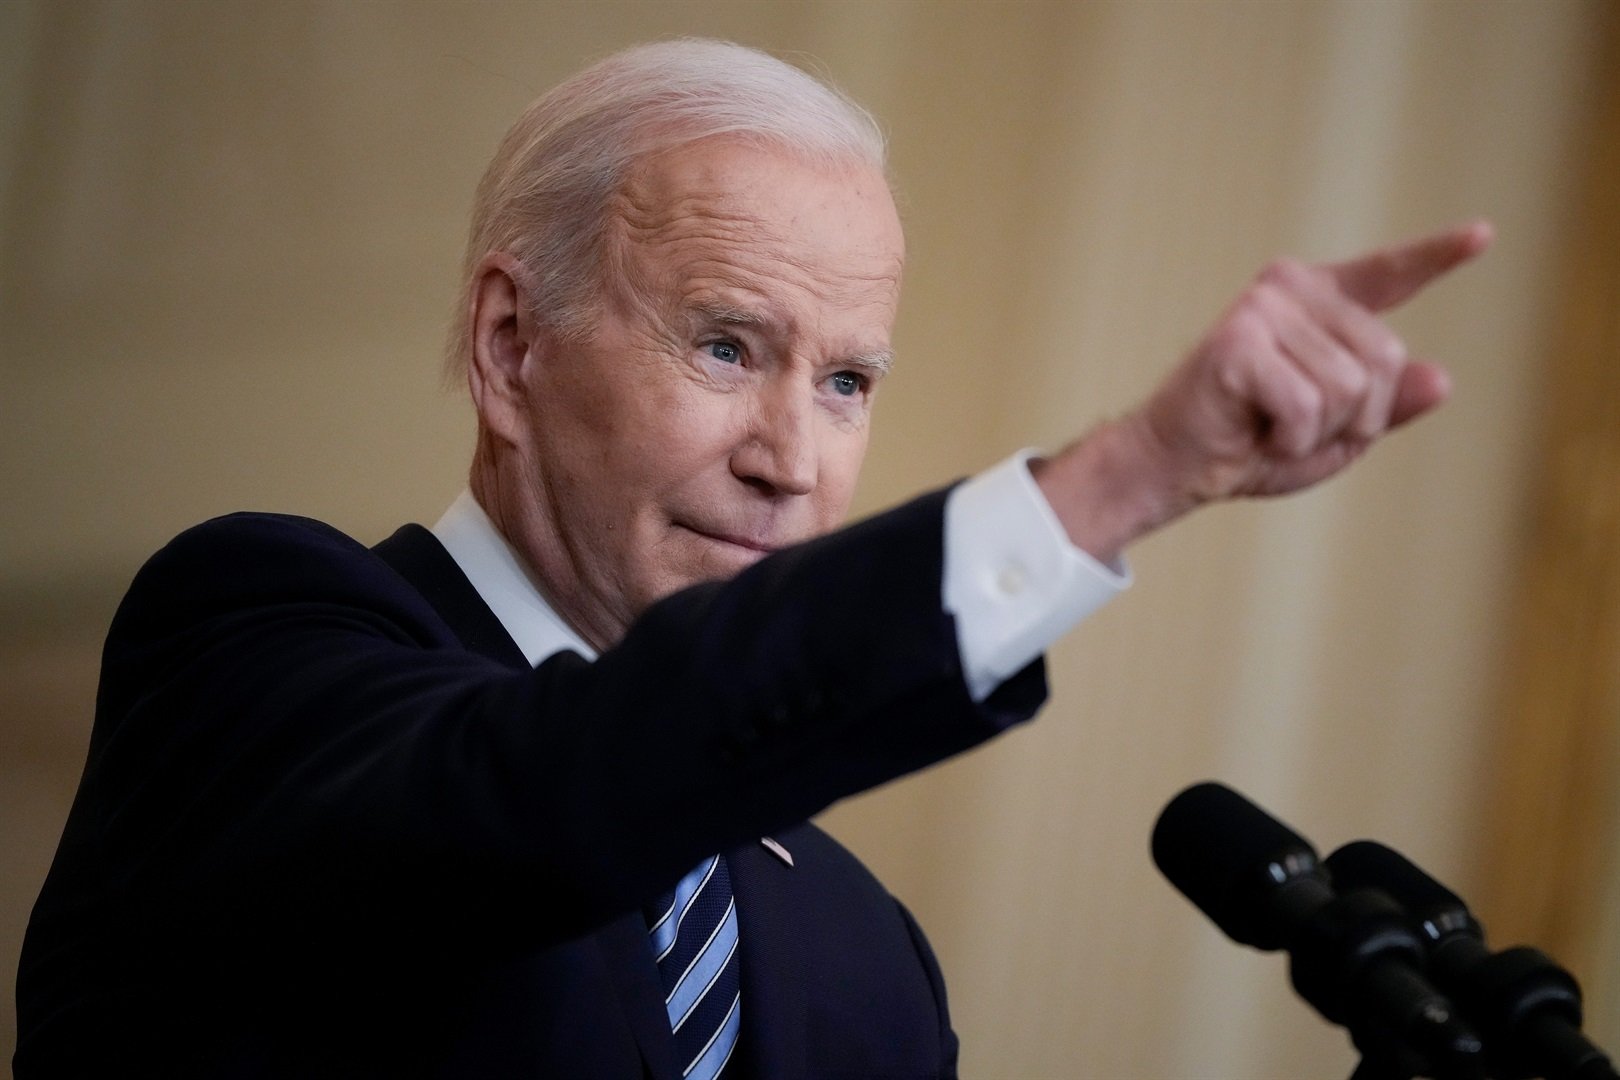 News24 | US 'all in on Africa', says Biden, as he asks for quick AGOA reauthorisation